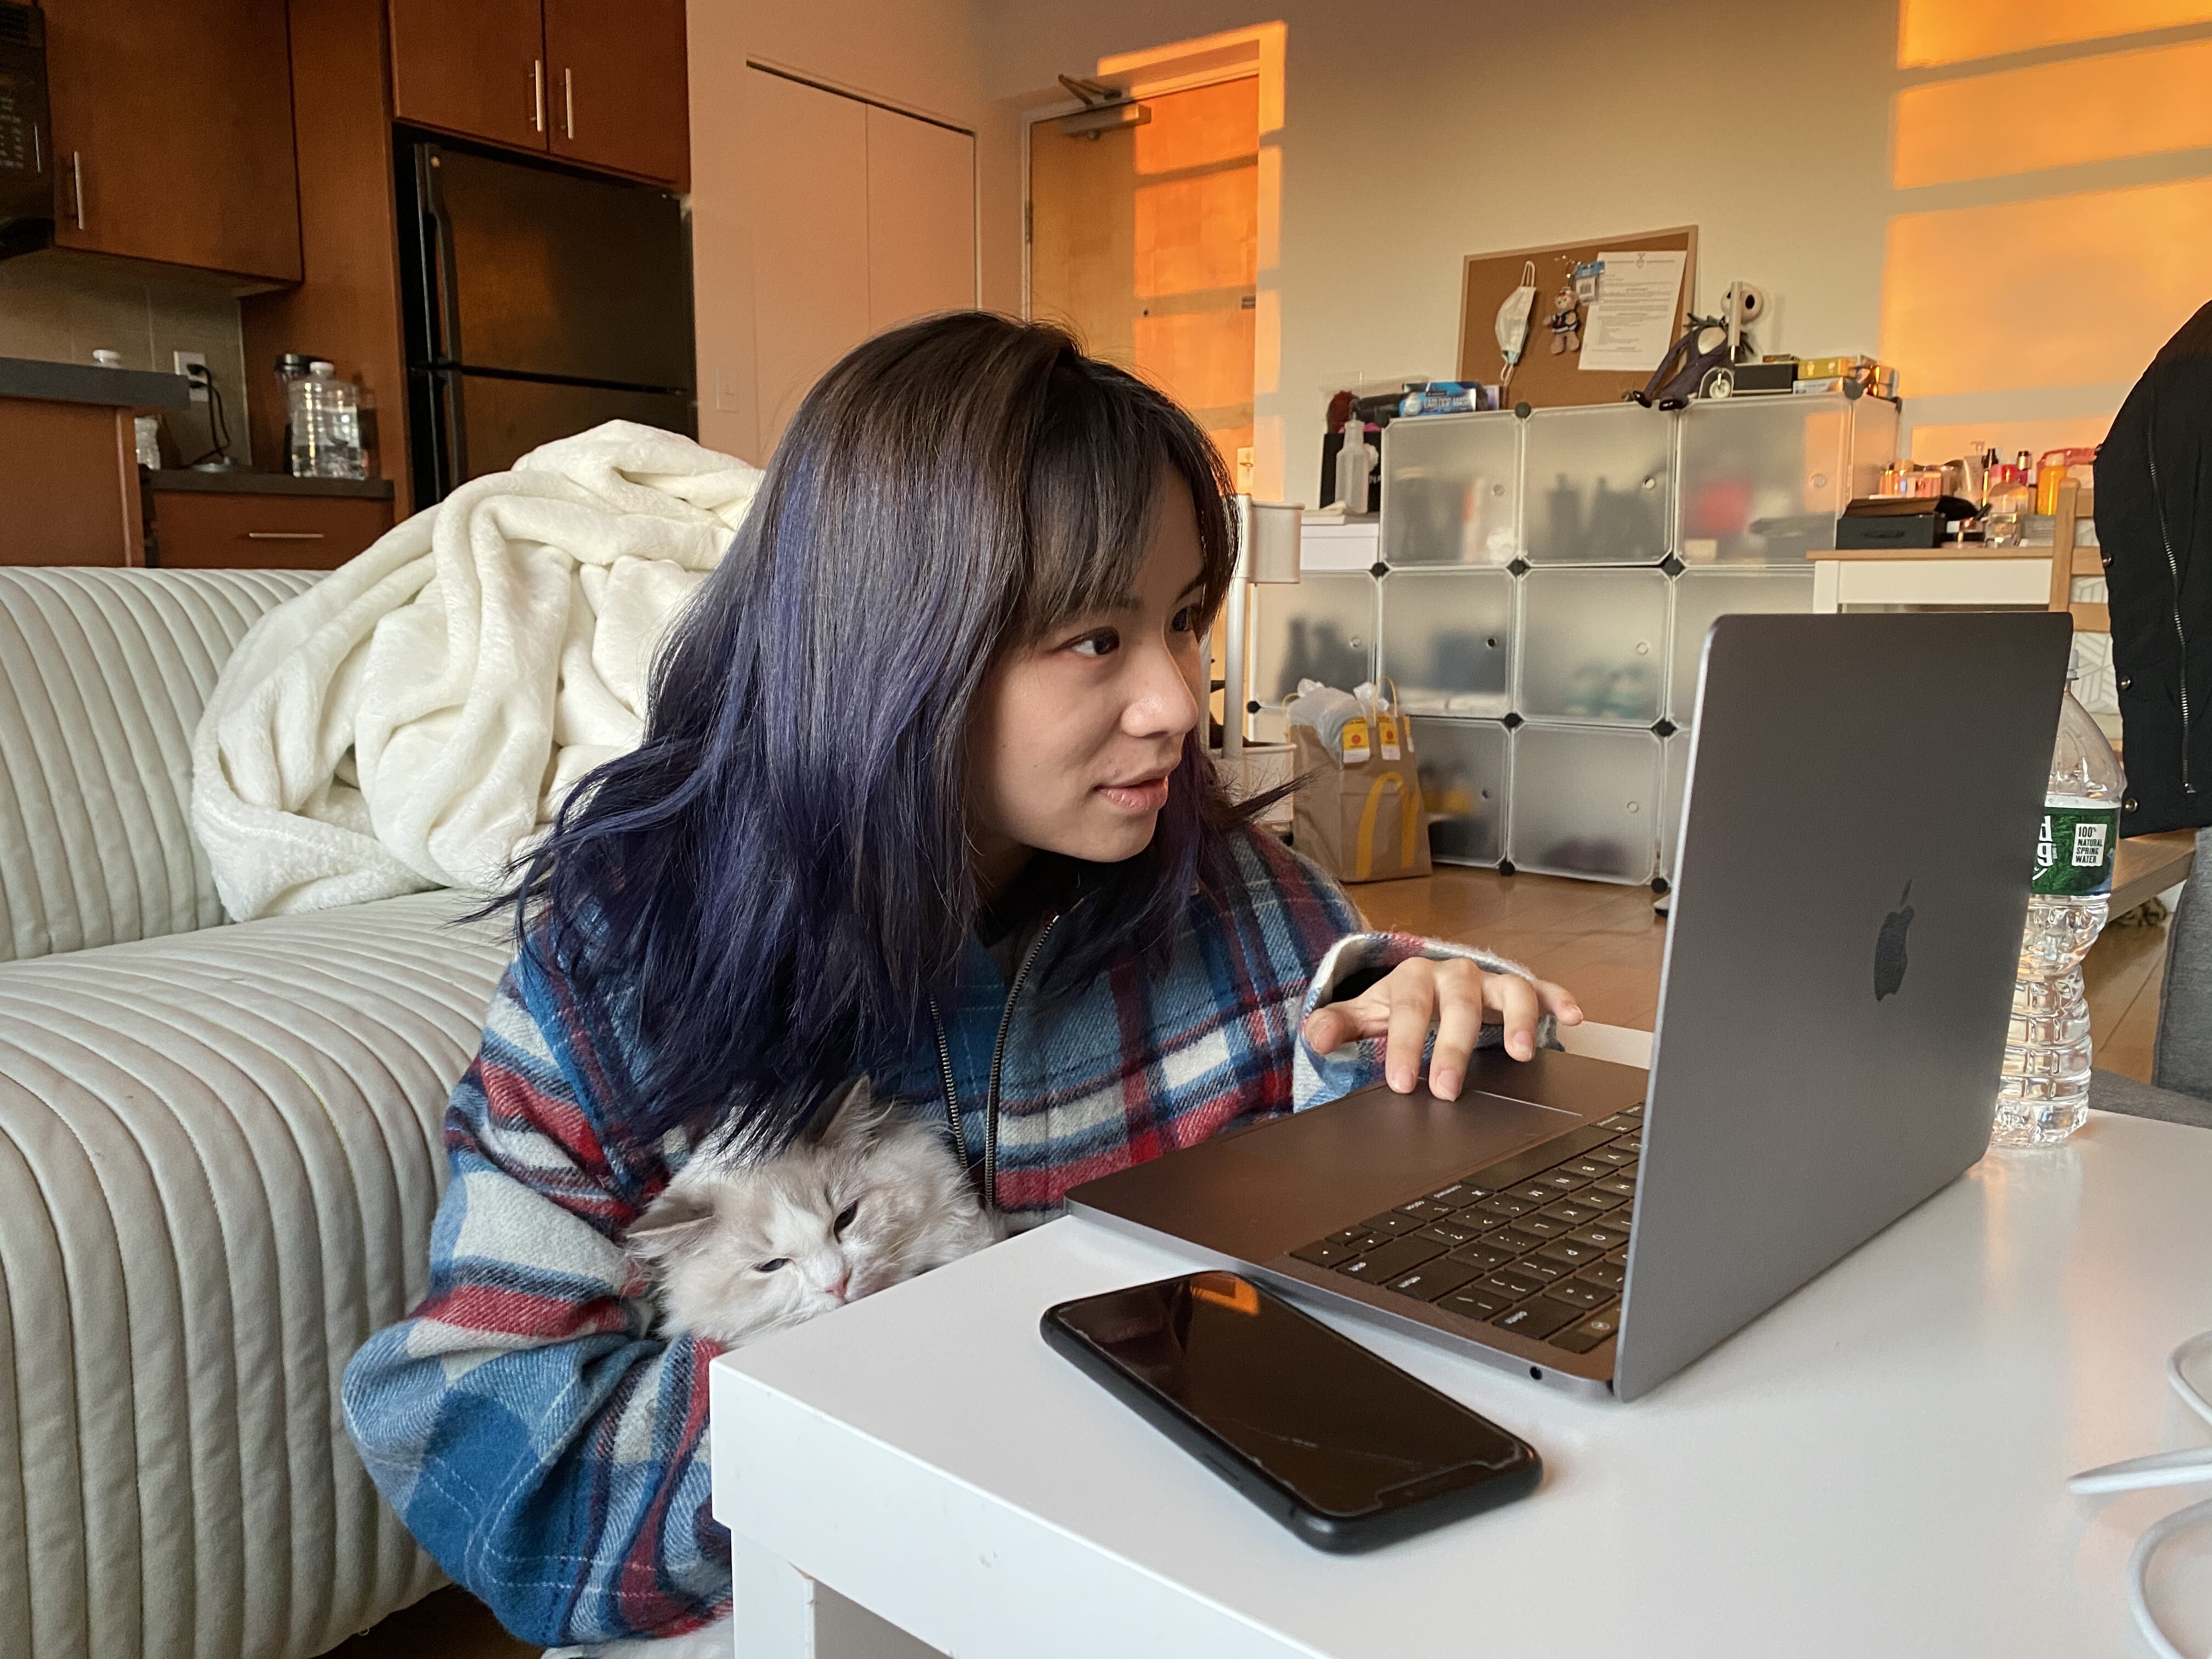 A Chinese student at Boston University works online while cuddling her cat at her home in Boston, Massachusetts, on March 27. While some feel online education is inadequate because of the decreased human interaction, other students find themselves more comfortable interacting with their teachers and peers through screens. Photo: Xinhua